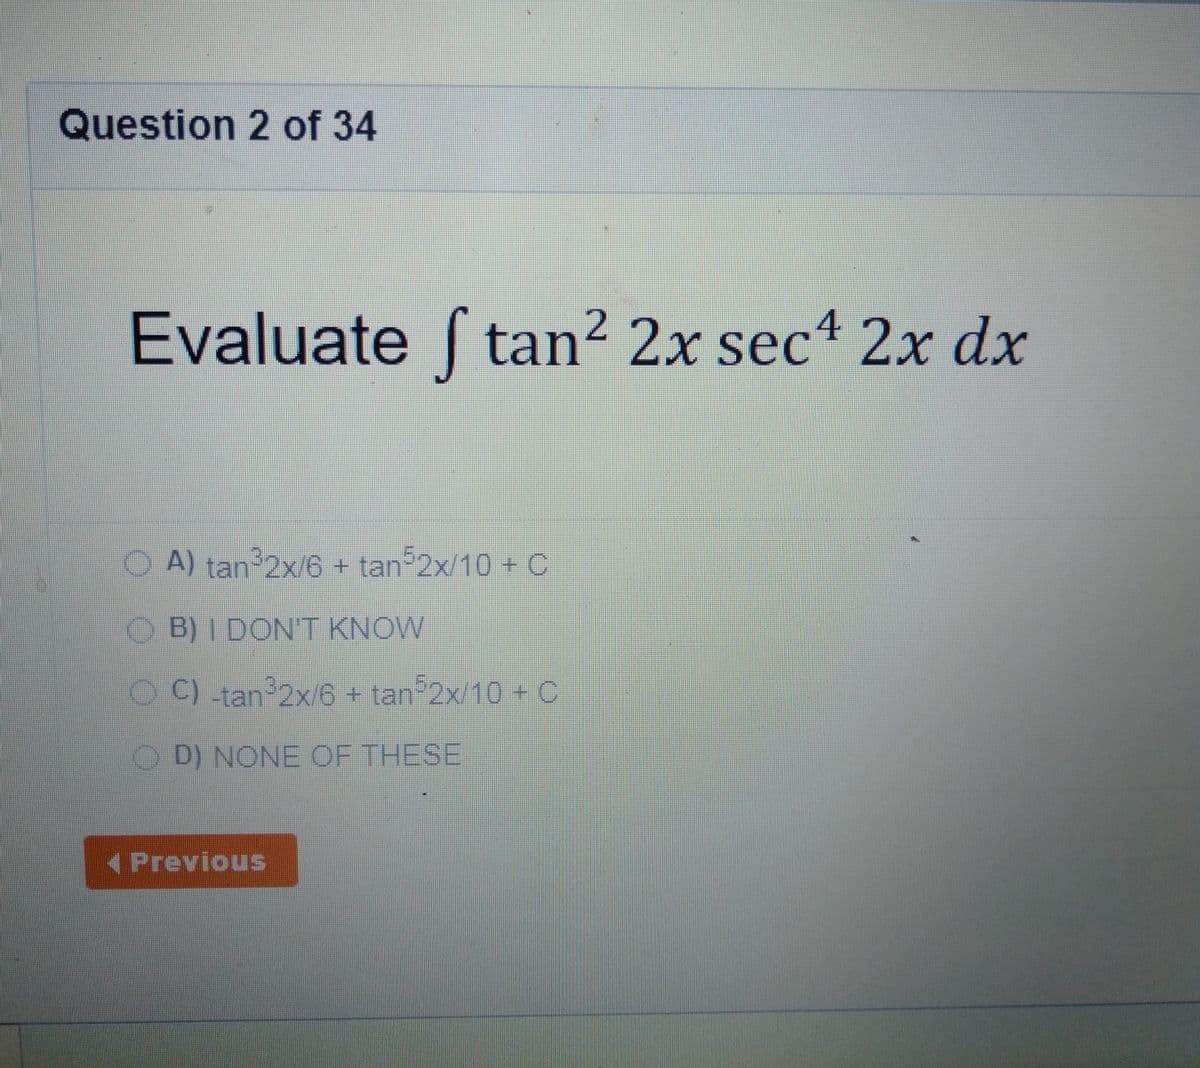 Question 2 of 34
Evaluate ſ 1 2x dx
tan 2x sec
O A) tan 2x/6 + tan 2x/10 + C
O B) I DONT KNOW
O C) -tan 2x/6 tan 2x/10 + C
O D) NONE OF THESE
( Previous
